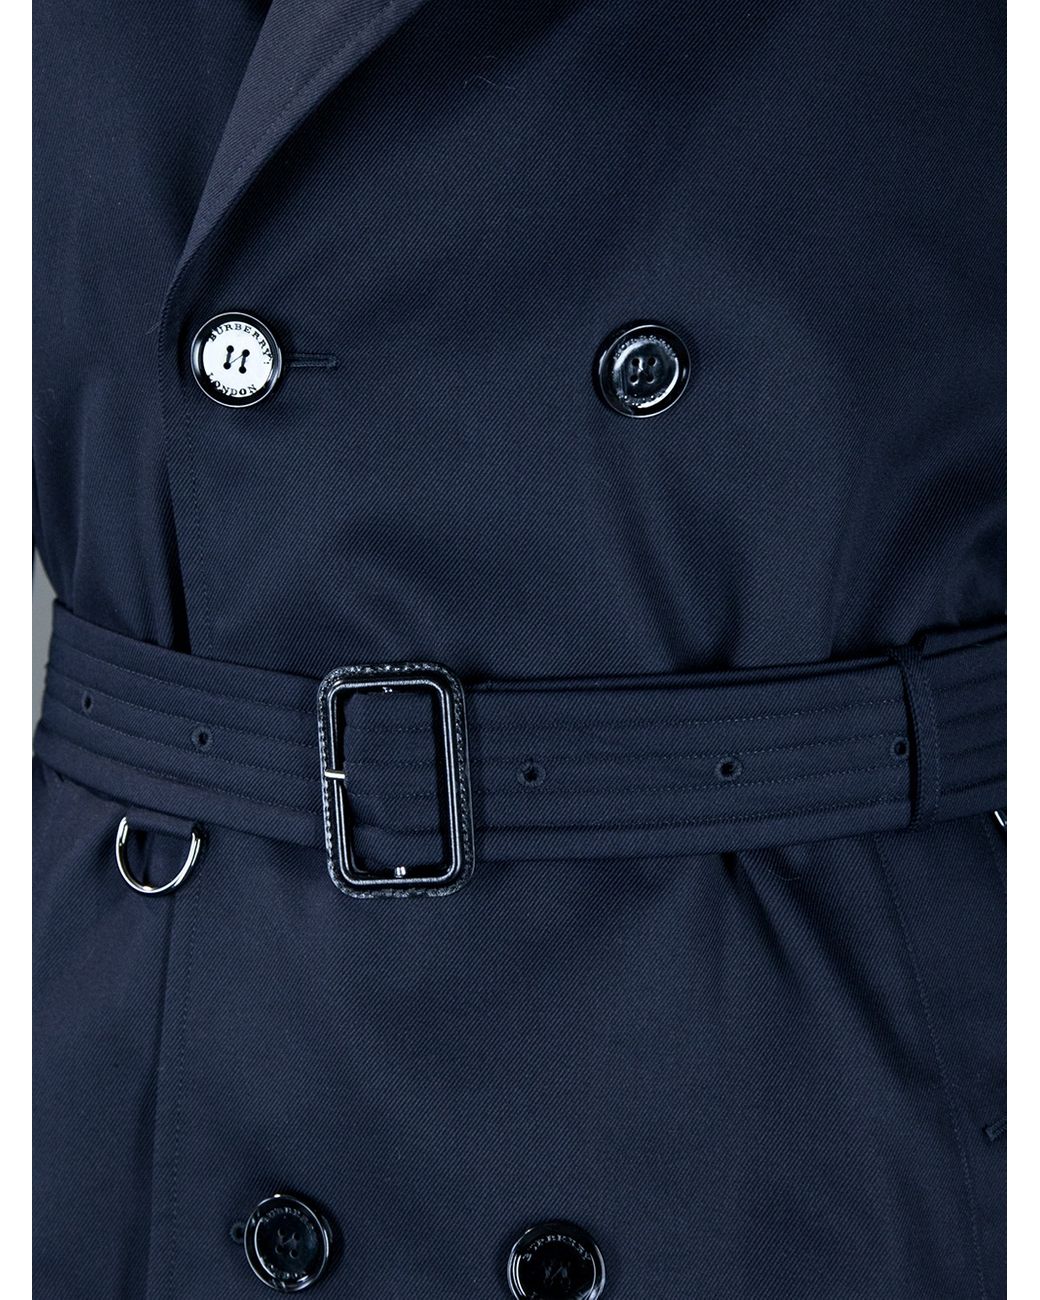 Burberry Britton Trenchcoat in Navy (Blue) for Men | Lyst